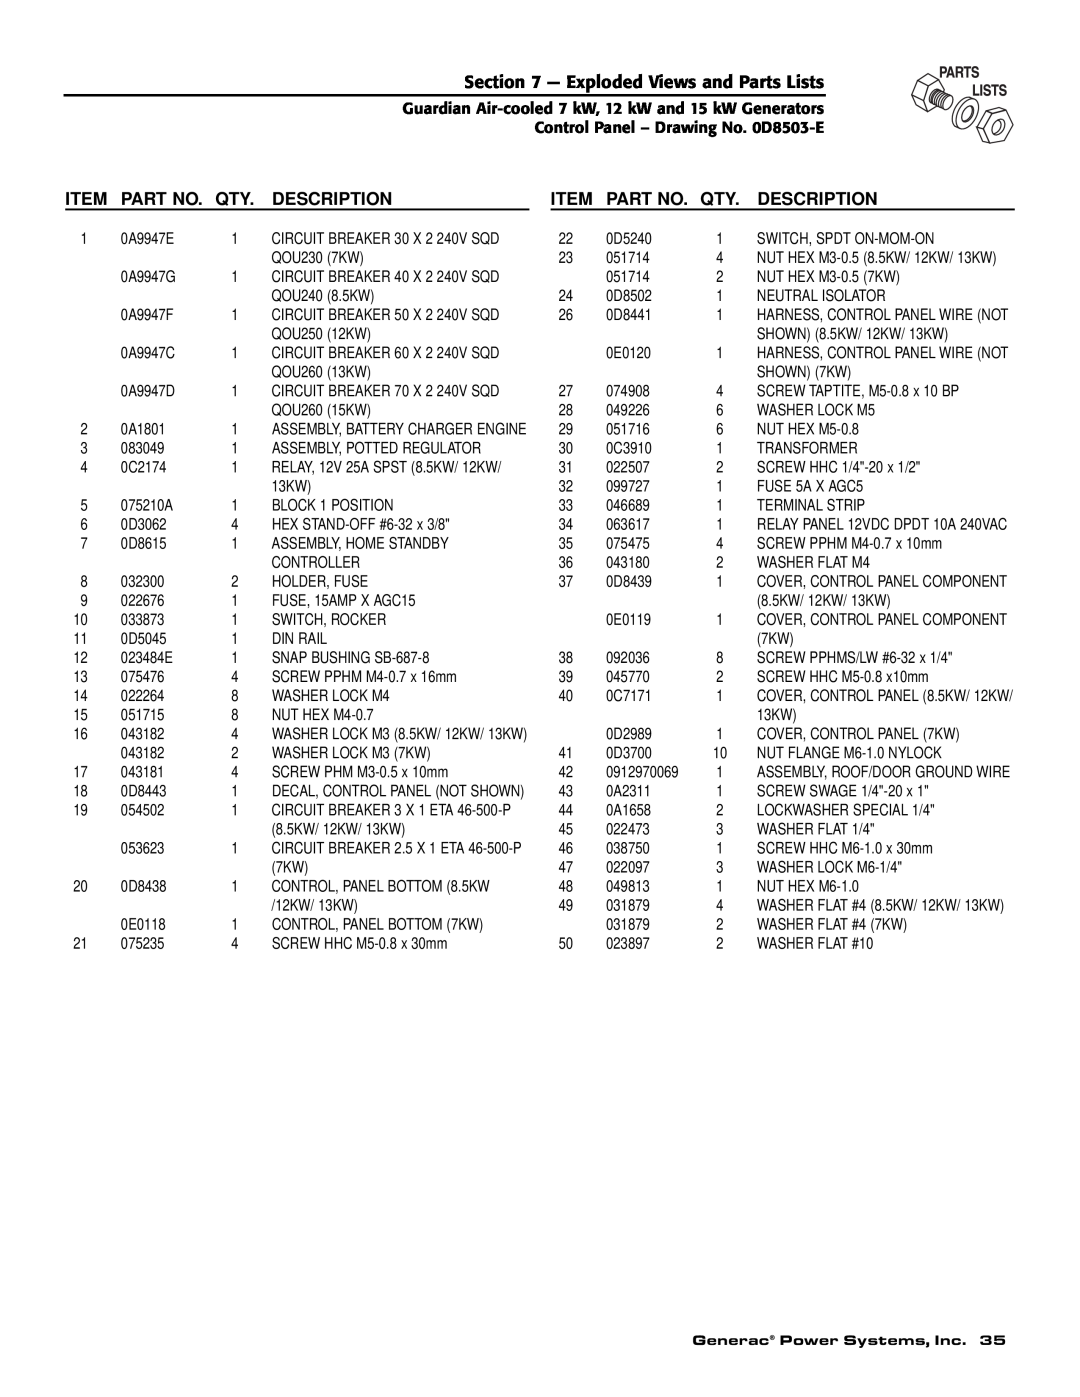 Generac 04389-1, 04456-1, 04390-1 owner manual Exploded Views and Parts Lists, Description 